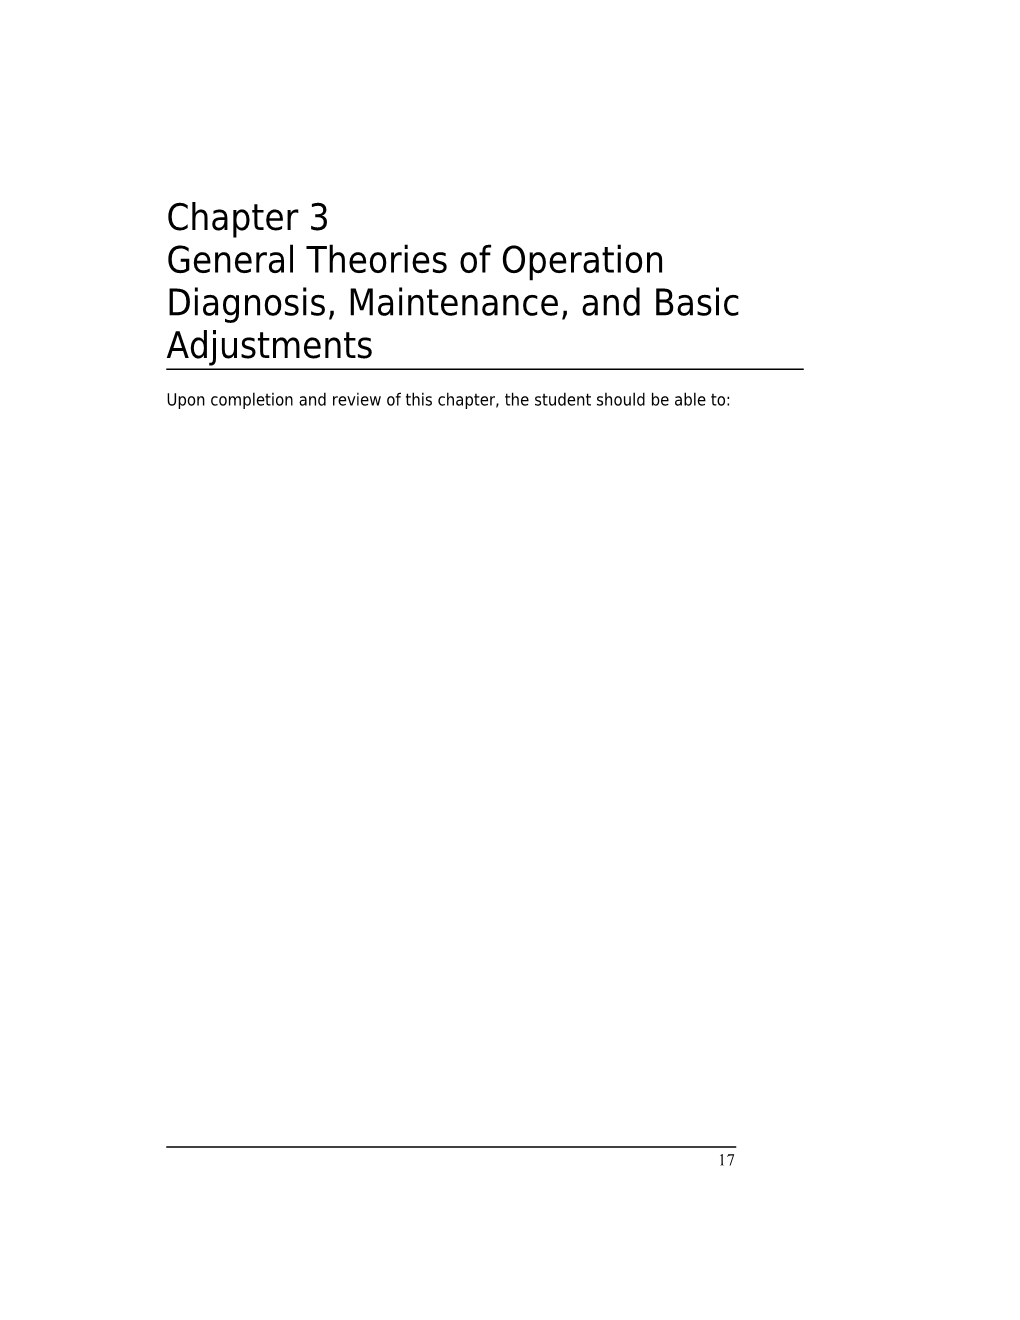 General Theories of Operation Diagnosis, Maintenance, and Basic Adjustments